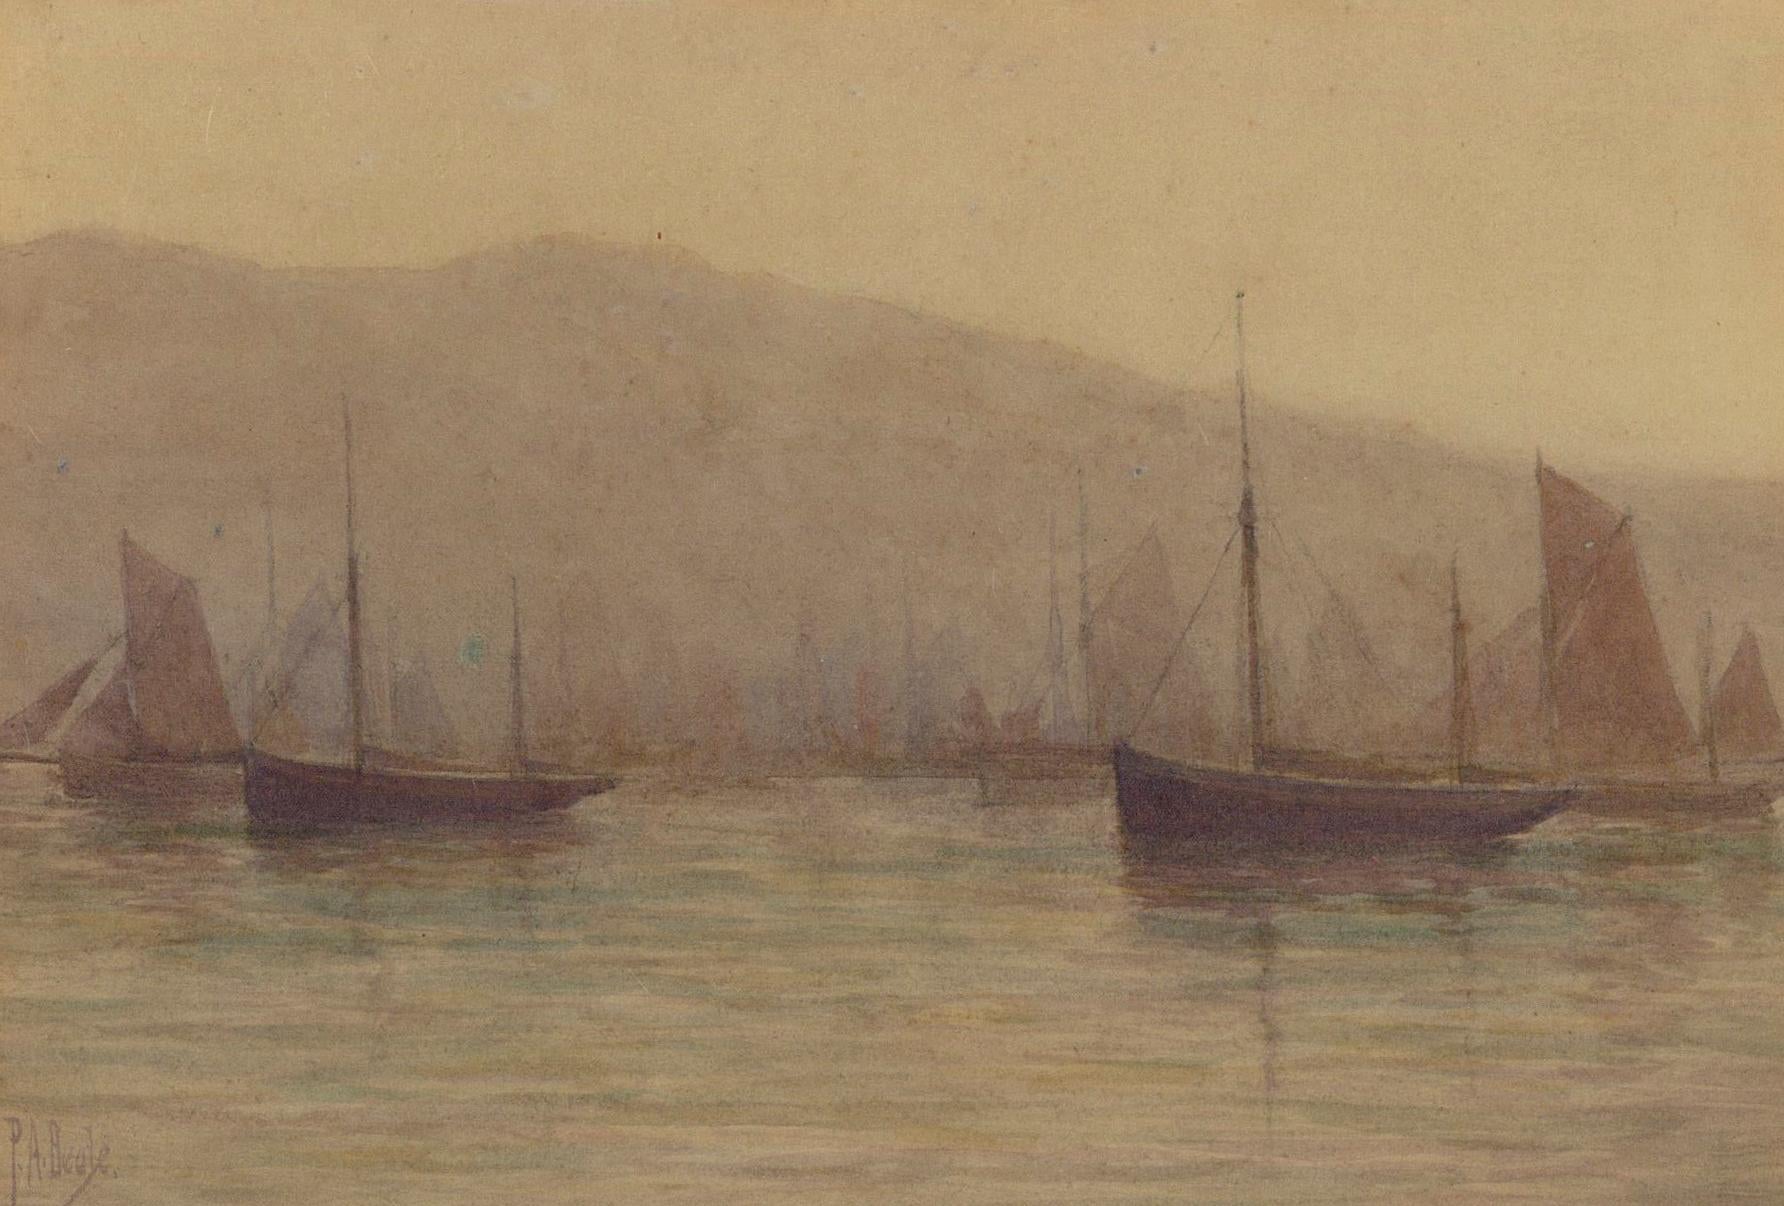 P.A. Beale - Framed c.1900 Watercolour, Misty Morning, Trawlers at Brixham - Art by Unknown